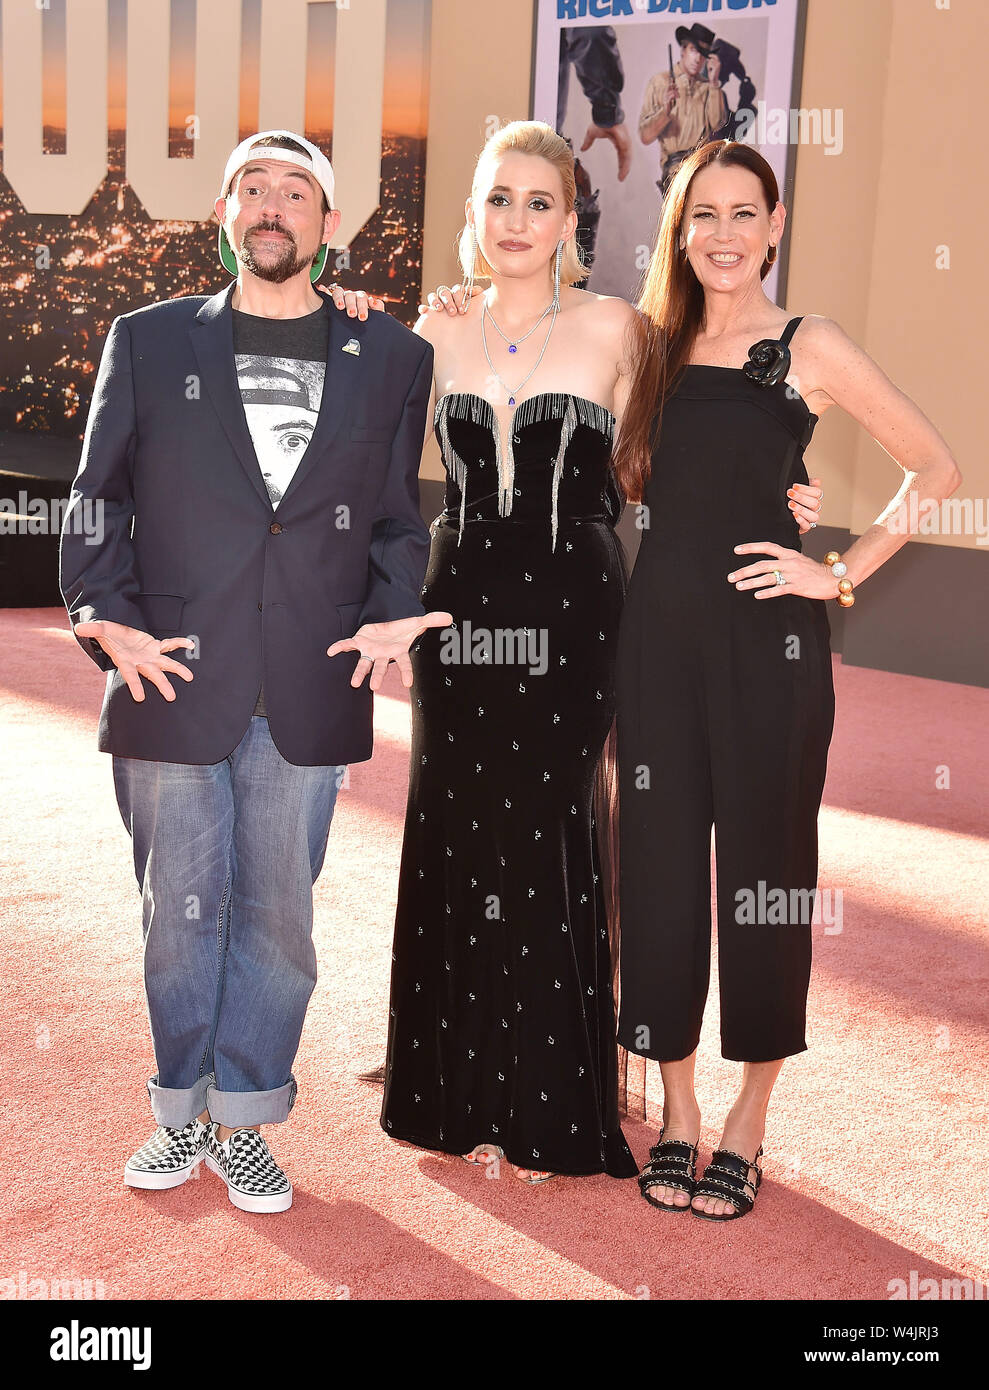 HOLLYWOOD, CA - JULY 22: (L-R) Kevin Smith, Harley Quinn Smith and Jennifer Schwalbach Smith attend the Sony Pictures' 'Once Upon A Time...In Hollywood' Los Angeles Premiere at the TCL Chinese Theatre on July 22, 2019 in Hollywood, California. Stock Photo